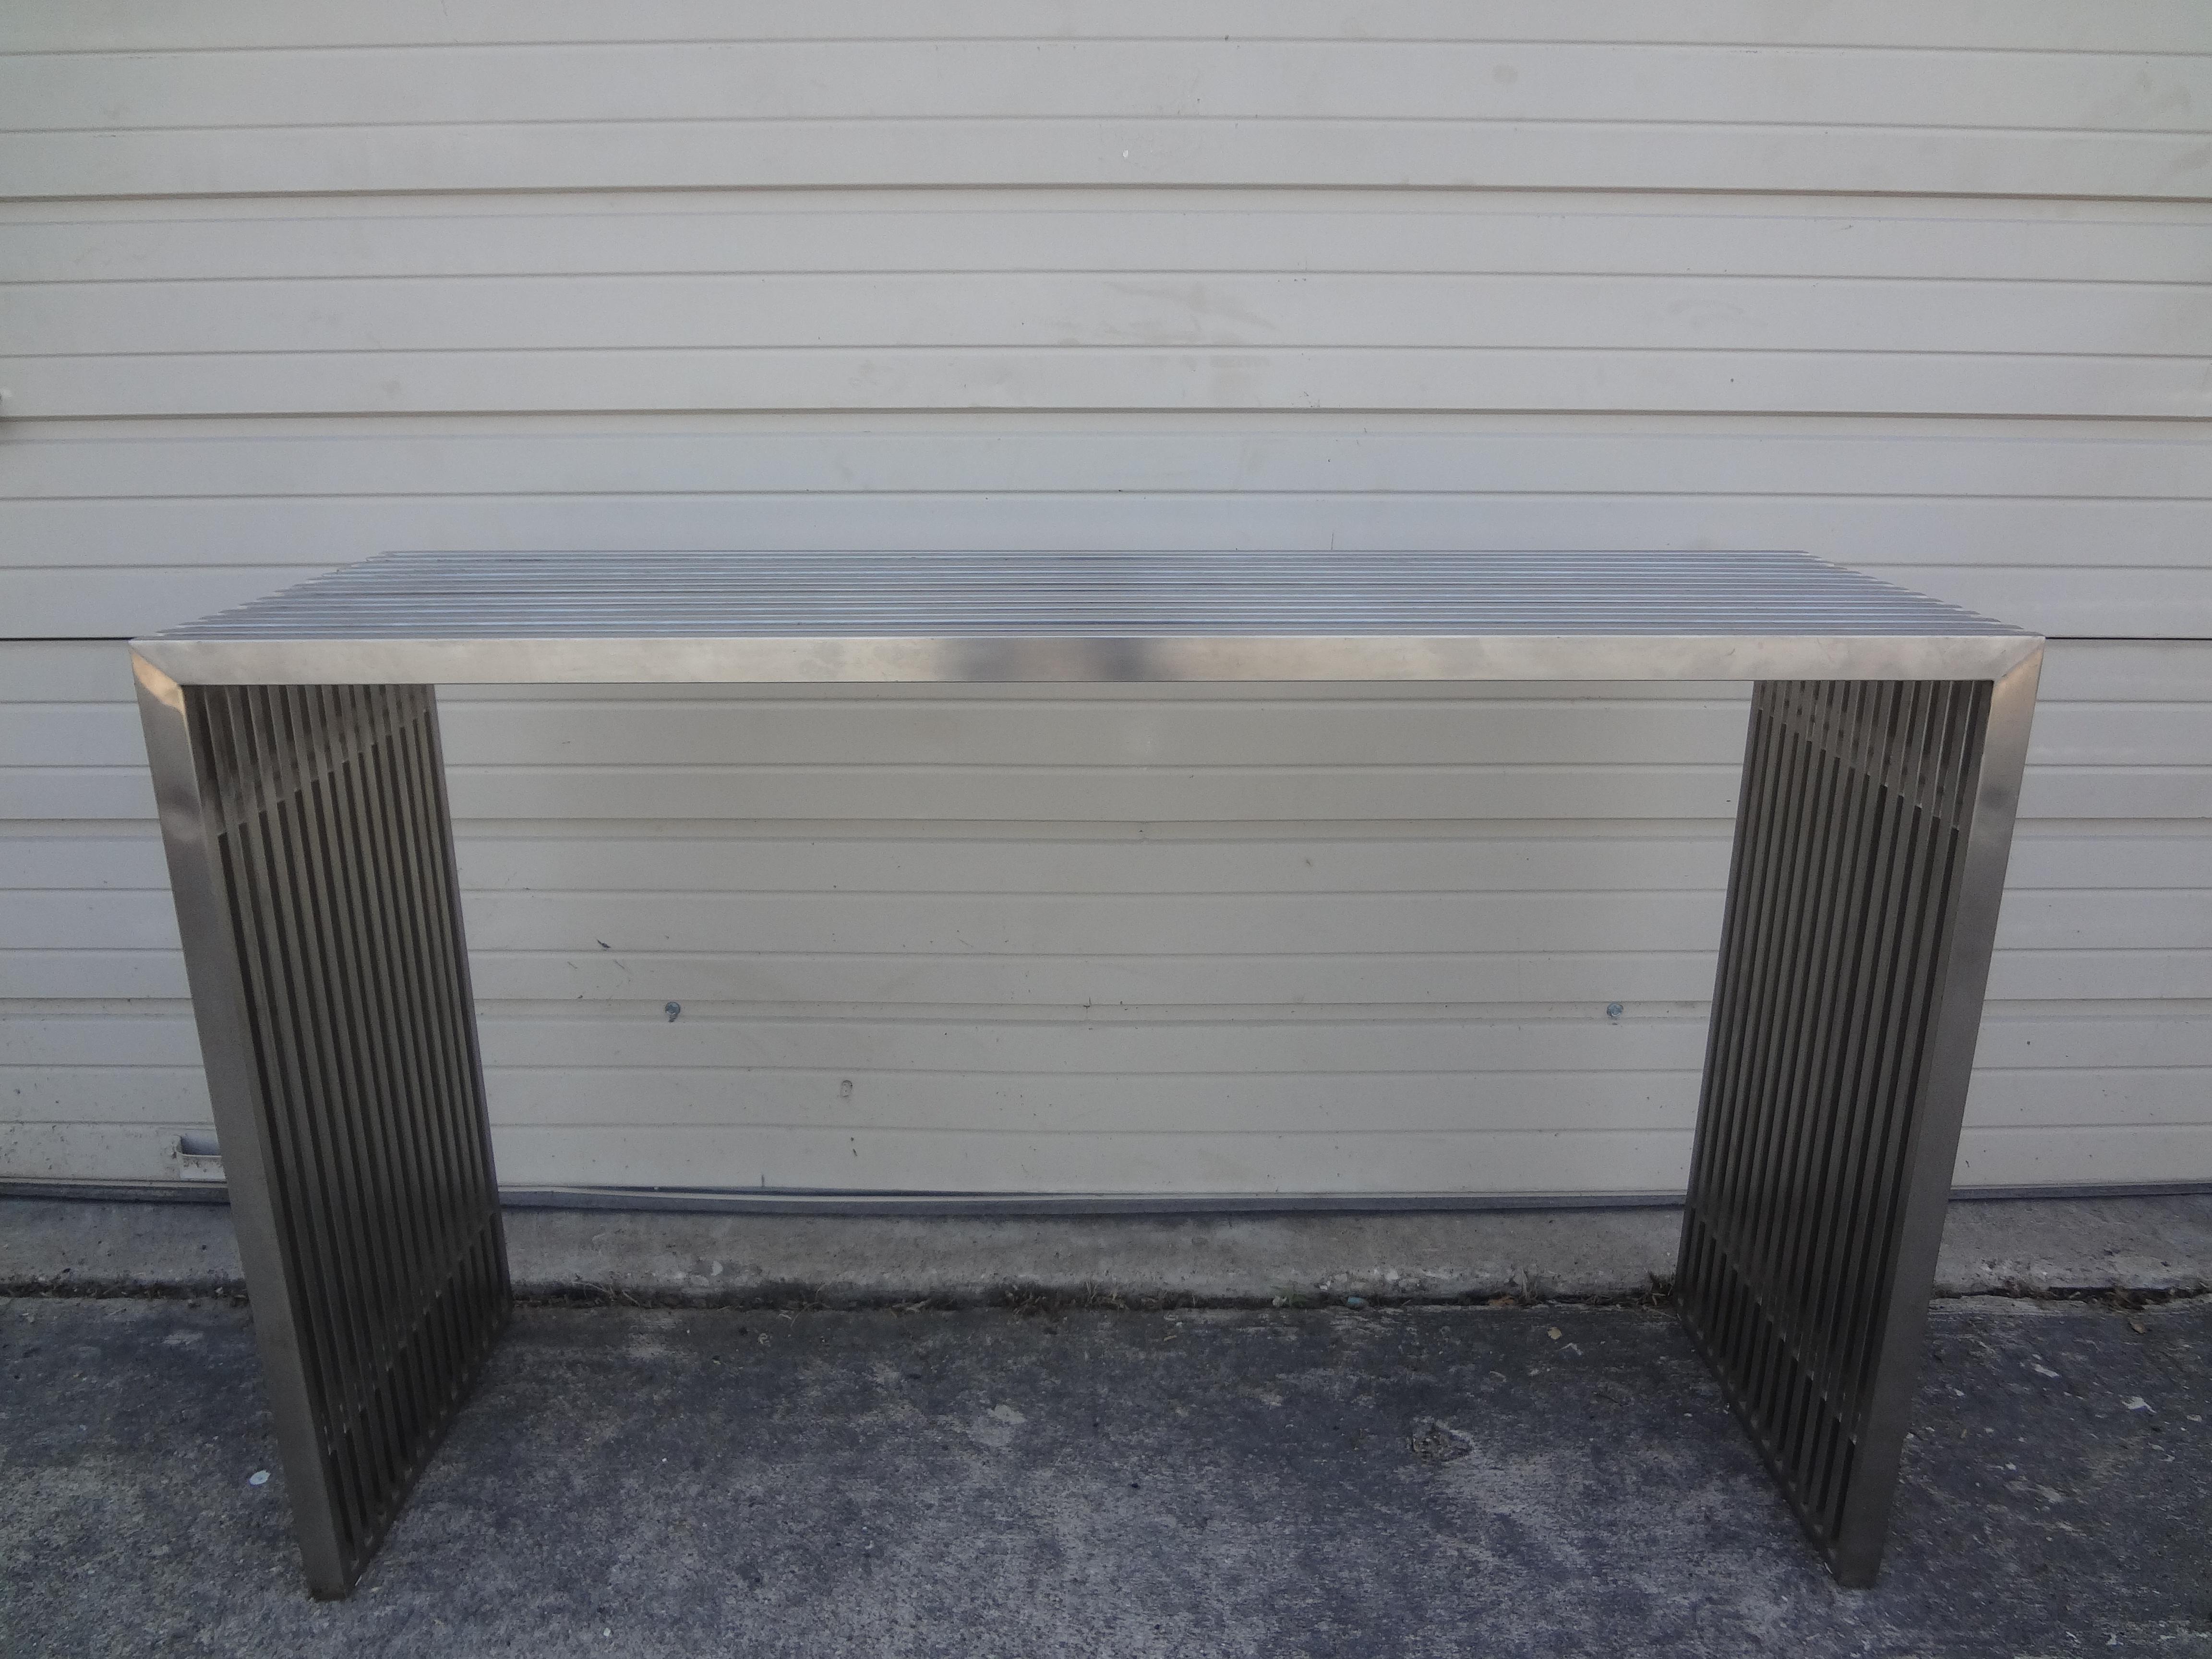 Midcentury stainless steel and acrylic console table. This handsome stainless and lucite console table or sofa table, possibly Italian can be used with or without a glass top.
This does not come with a glass top.